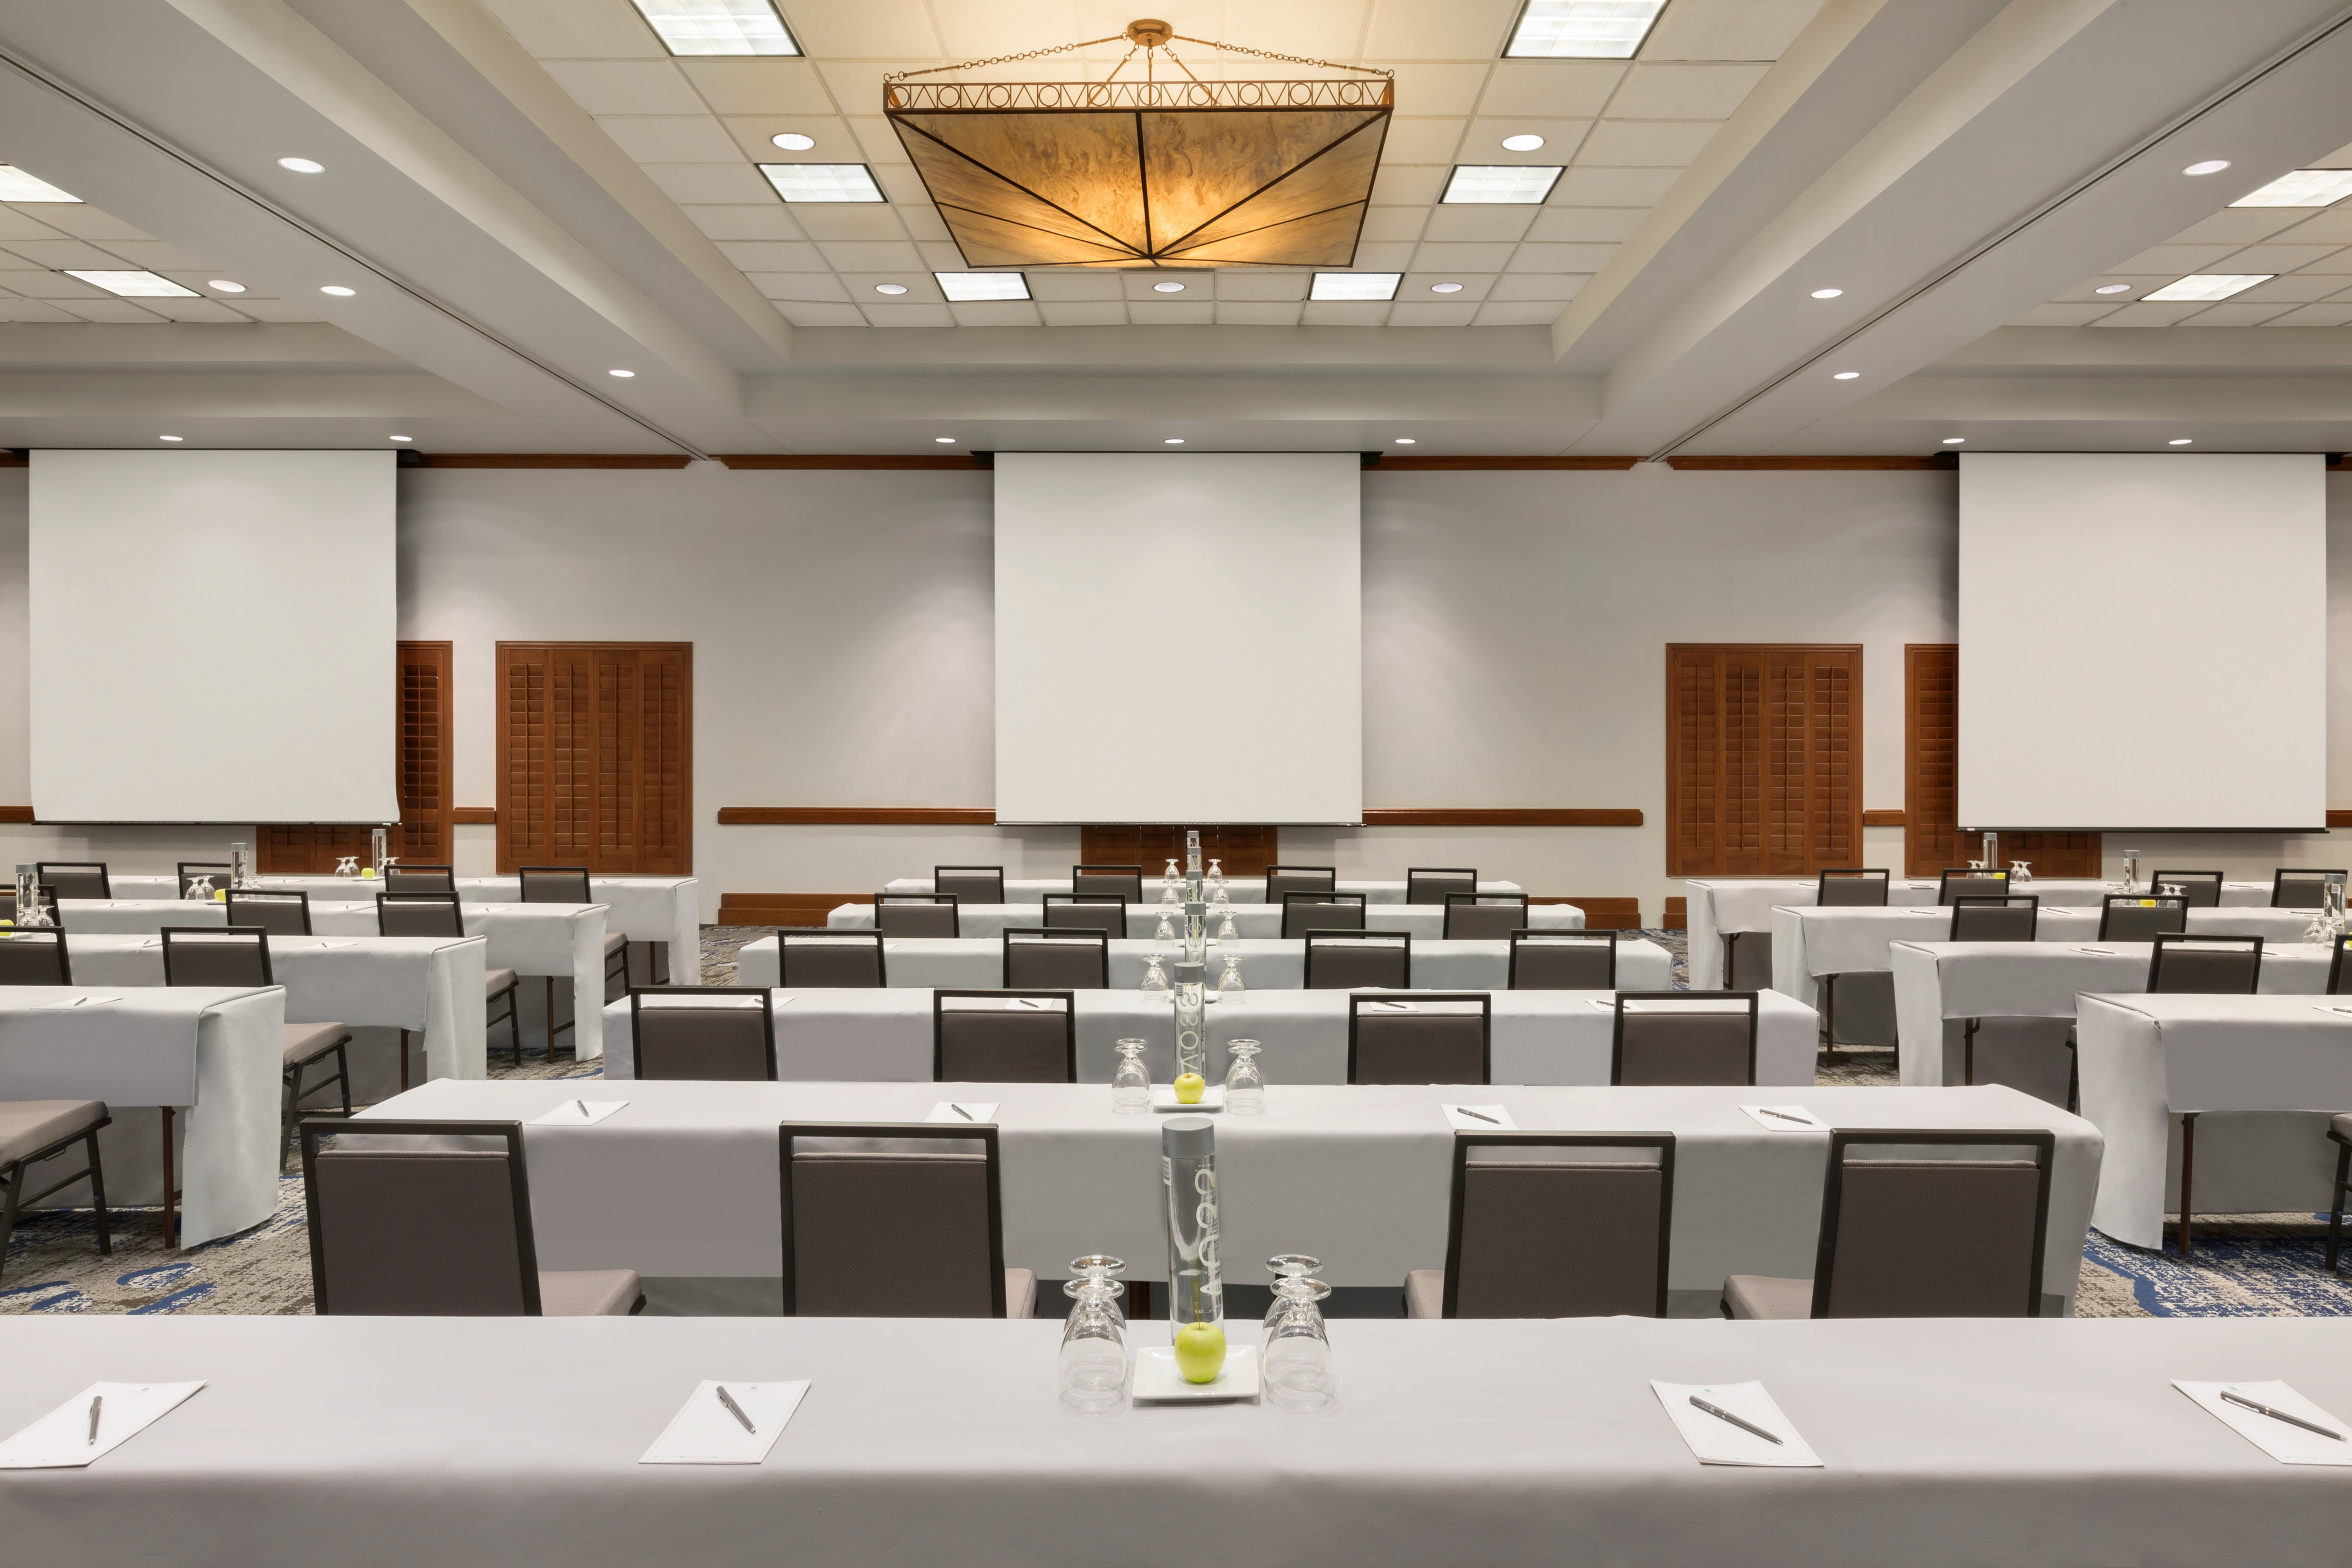 Embassy Suites Dallas - DFW Airport North Outdoor World Hotel, TX - Cross Timbers Classroom